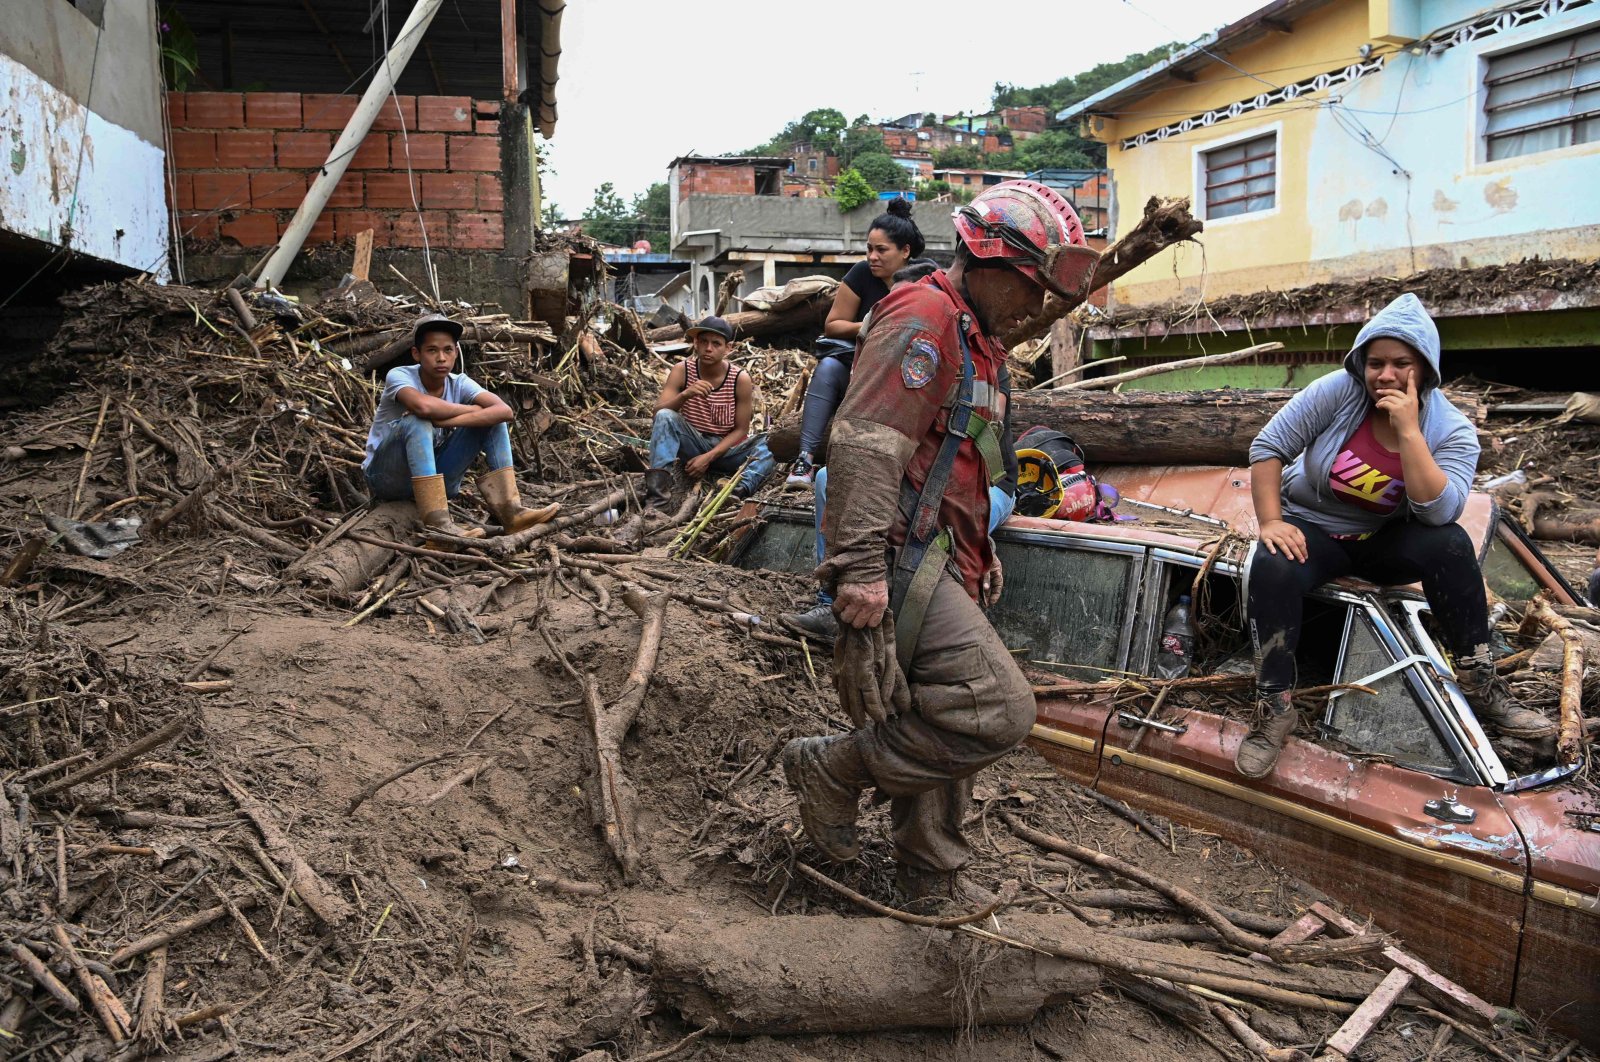 Residents remain on top of a semi-buried vehicle as rescuers search for their missing relatives after a landslide washed away dozens of homes during heavy rains, Las Tejerias, Aragua state, Venezuela, Oct. 9, 2022. (AFP Photo)